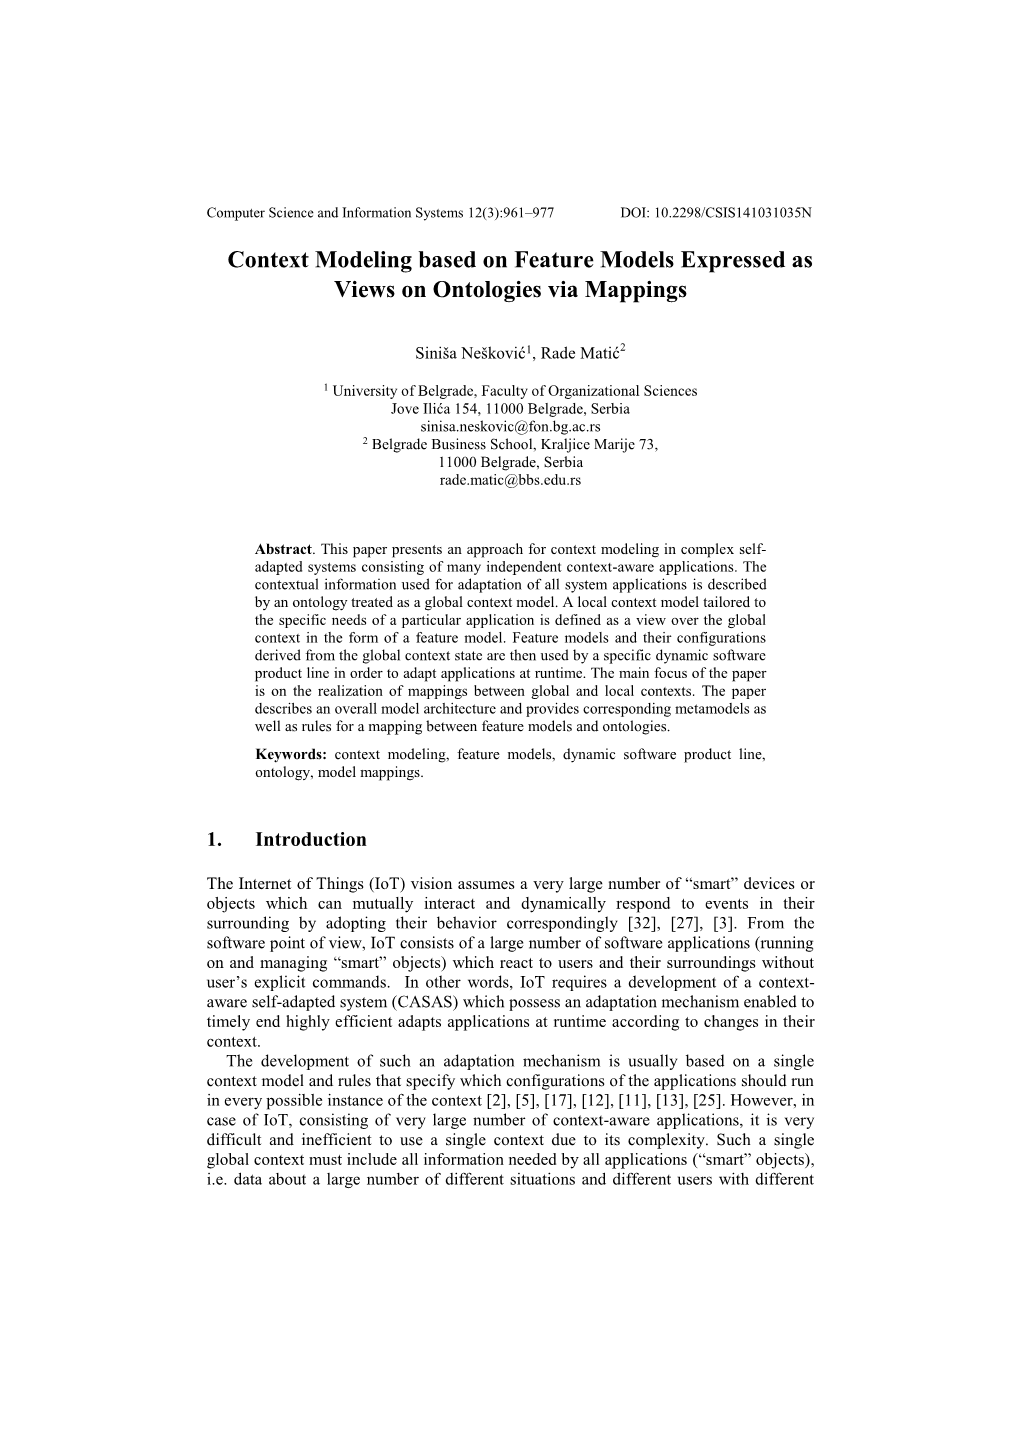 Context Modeling Based on Feature Models Expressed As Views on Ontologies Via Mappings